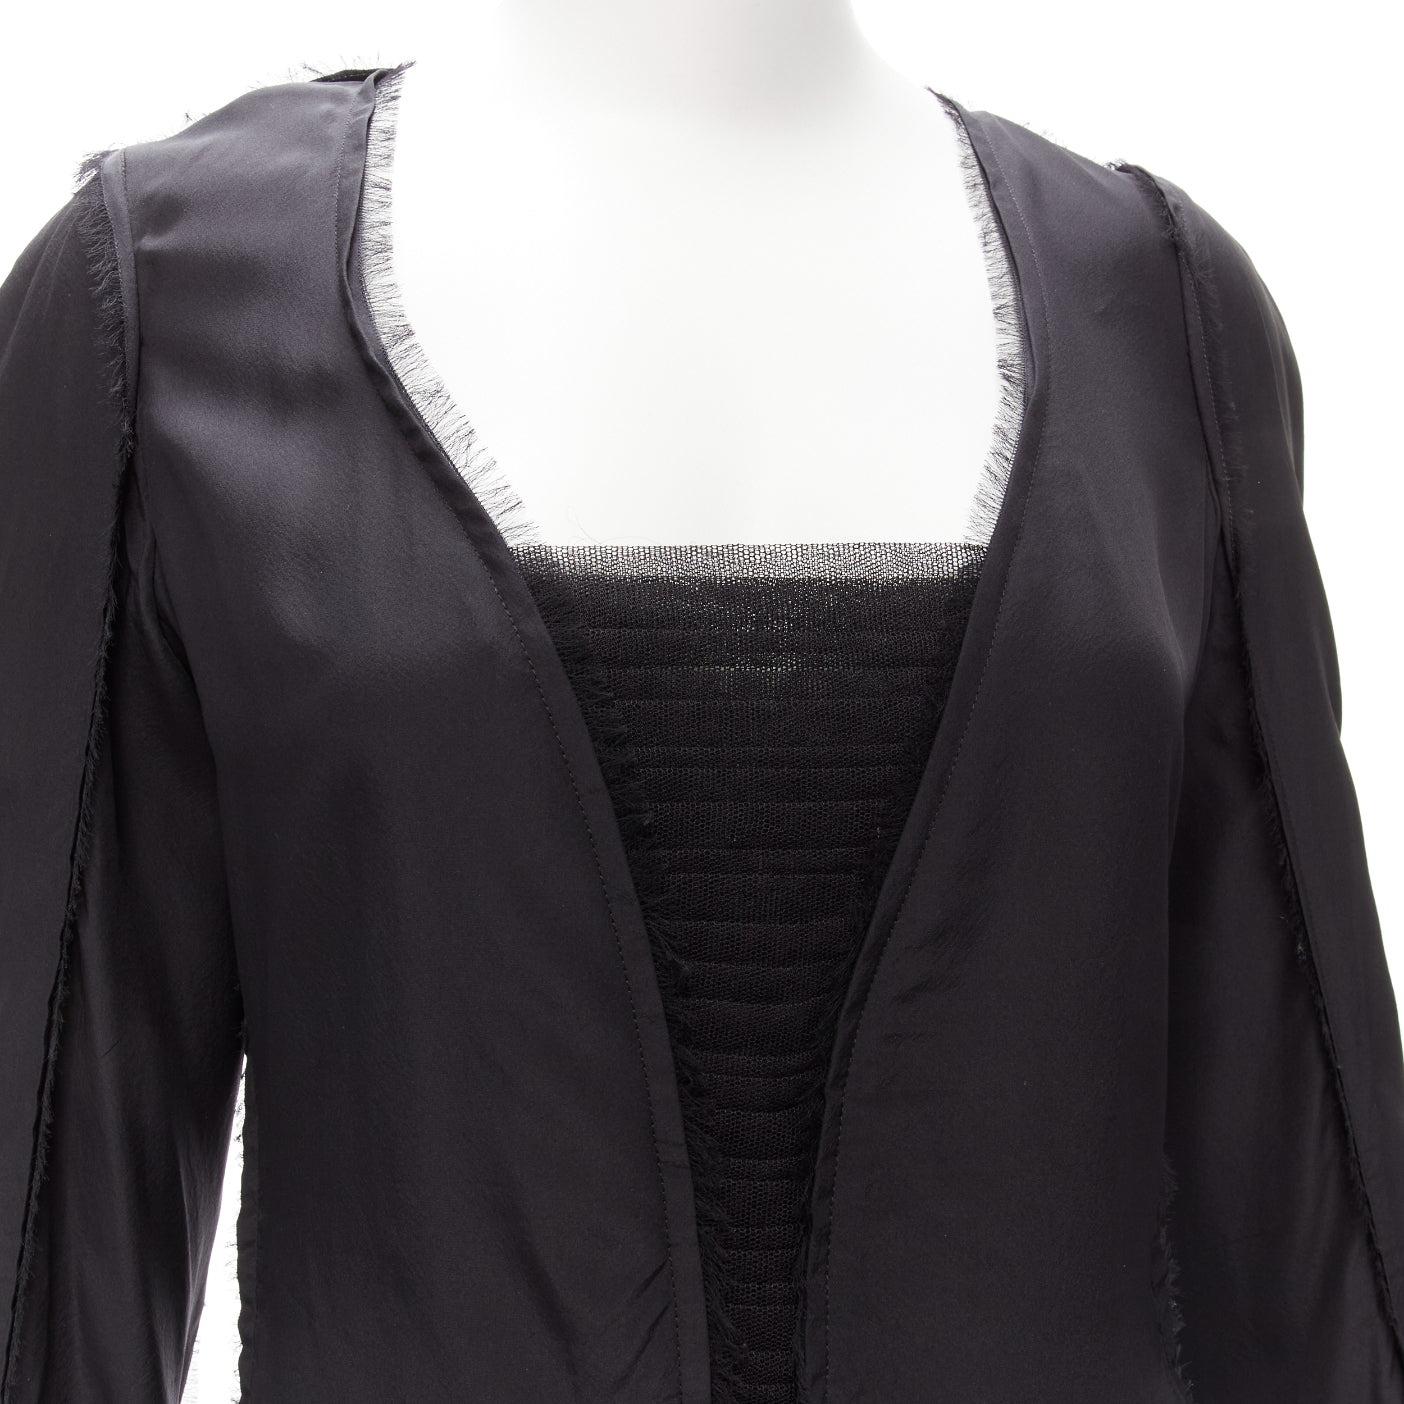 vintage YVES SAINT LAURENT TOM FORD black silk pleated mesh fringe trim top FR40
Reference: TGAS/A00338
Brand: Yves Saint Laurent
Model: Silk top
Collection: Fall Winter 2019
Material: Silk
Color: Black
Pattern: Solid
Closure: Zip
Extra Details: